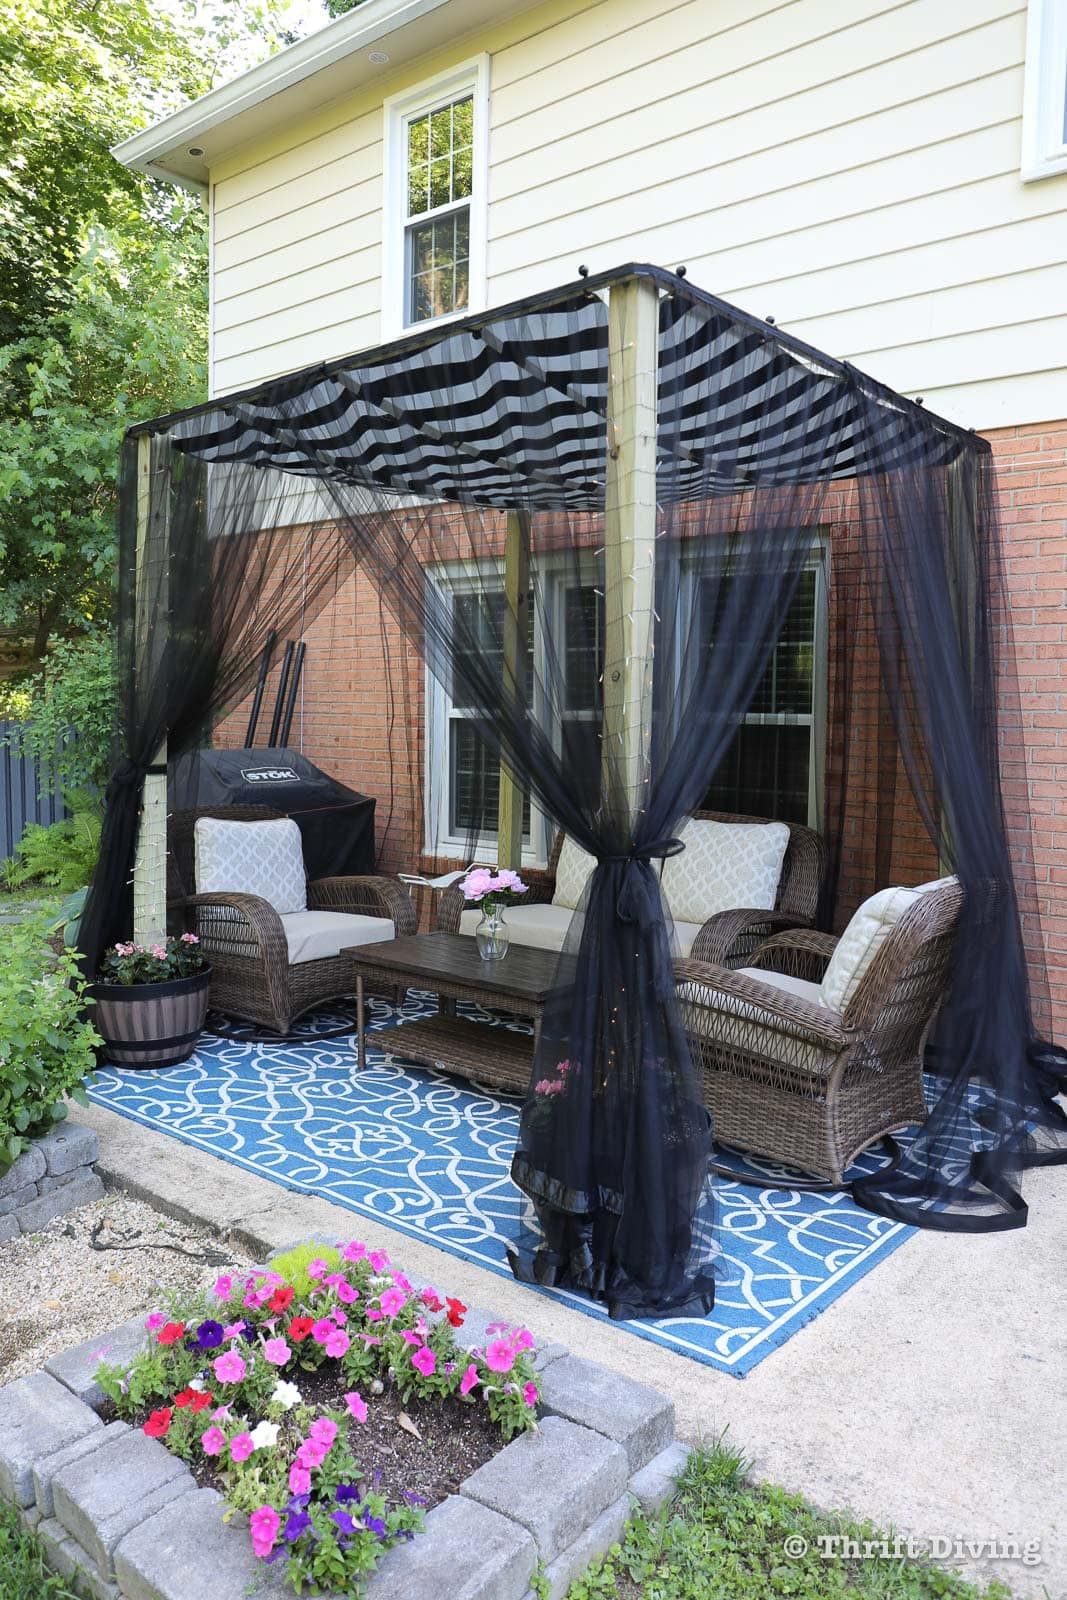 7 Patio Cover Ideas For Your Backyard